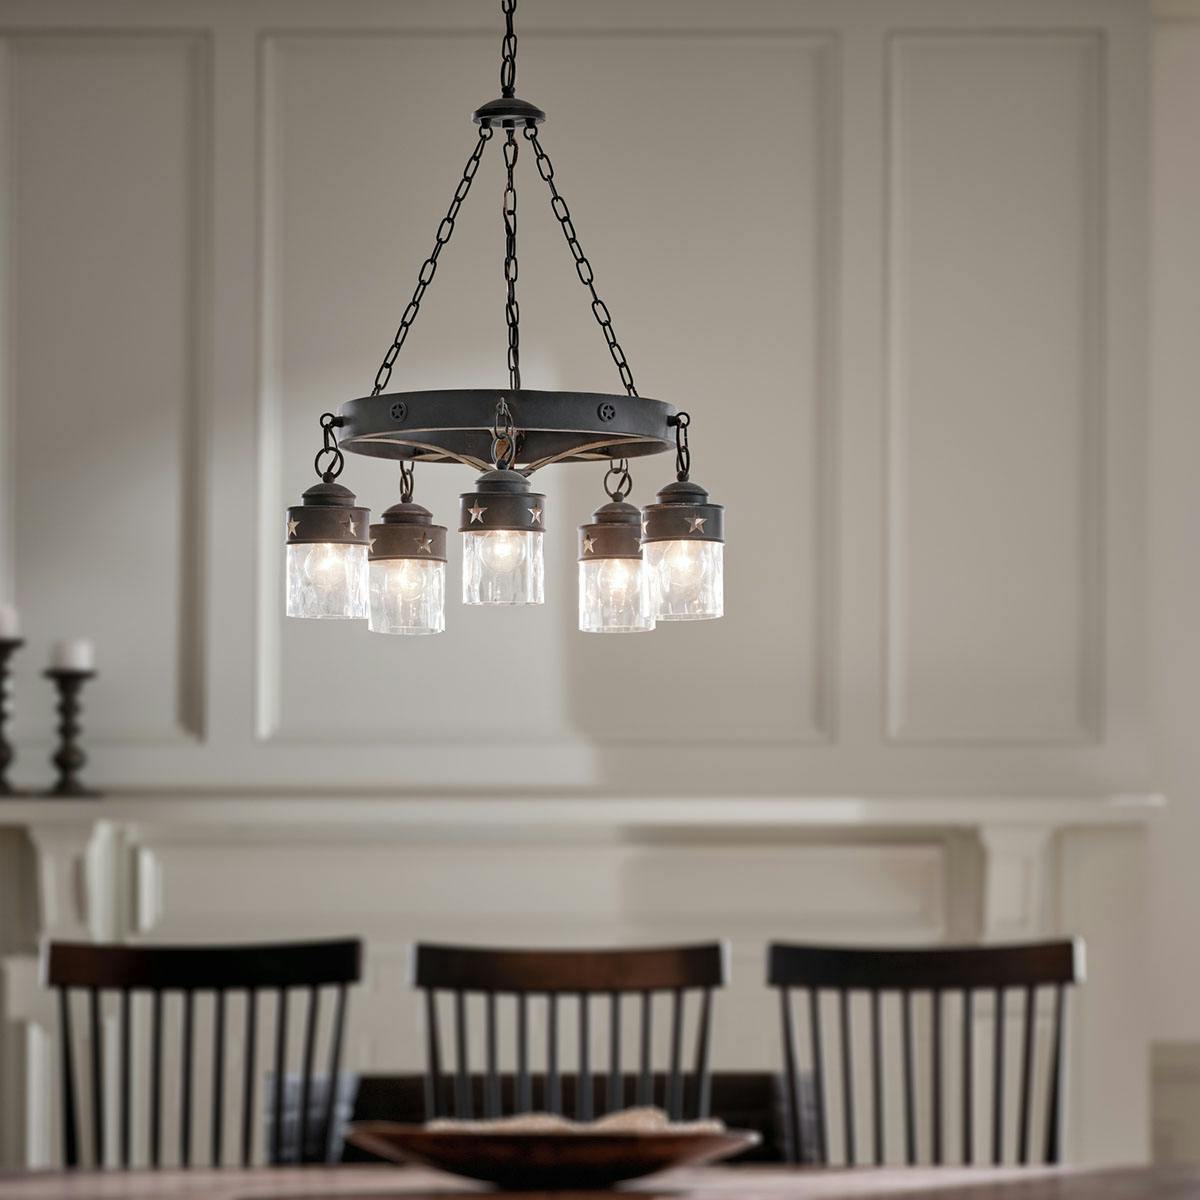 Day time dining room image featuring Grainger chandelier 82336